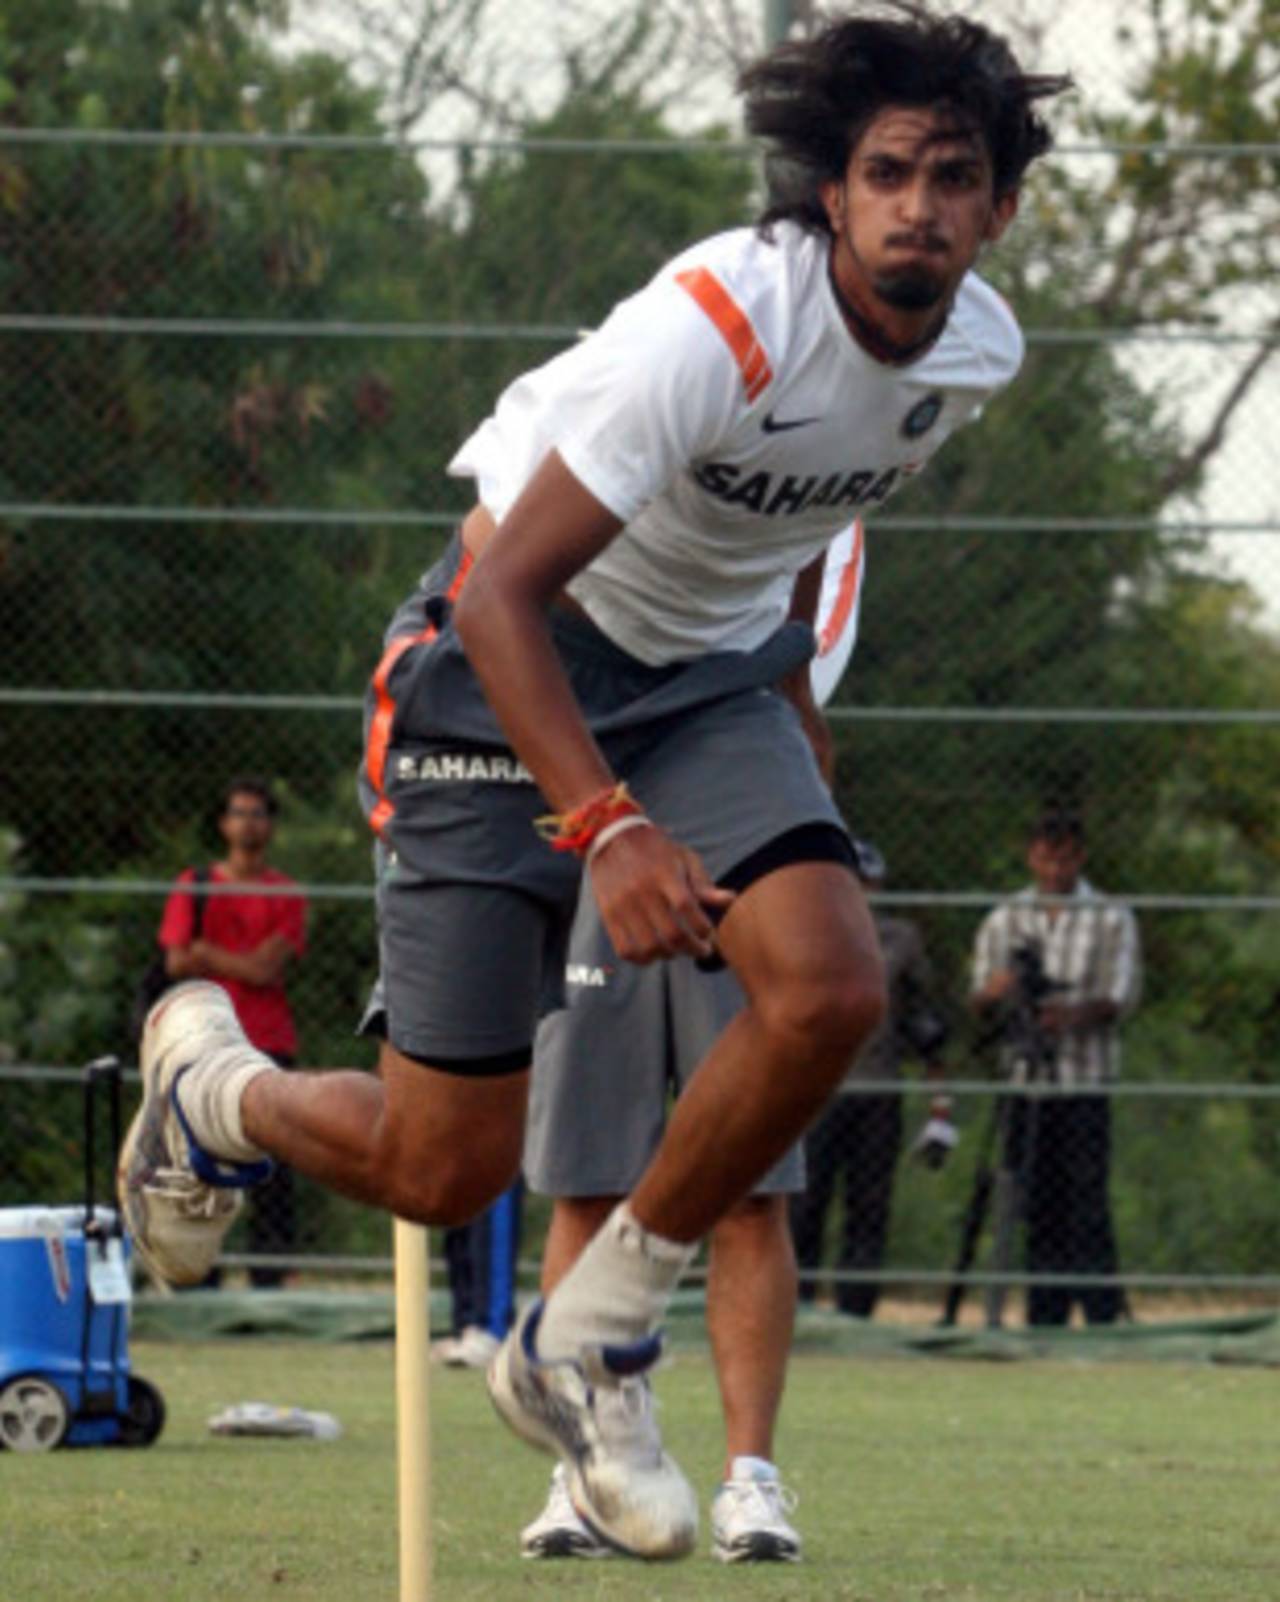 Ishant Sharma bowled during practice despite a dodgy ankle, Dambulla, August 12, 2010